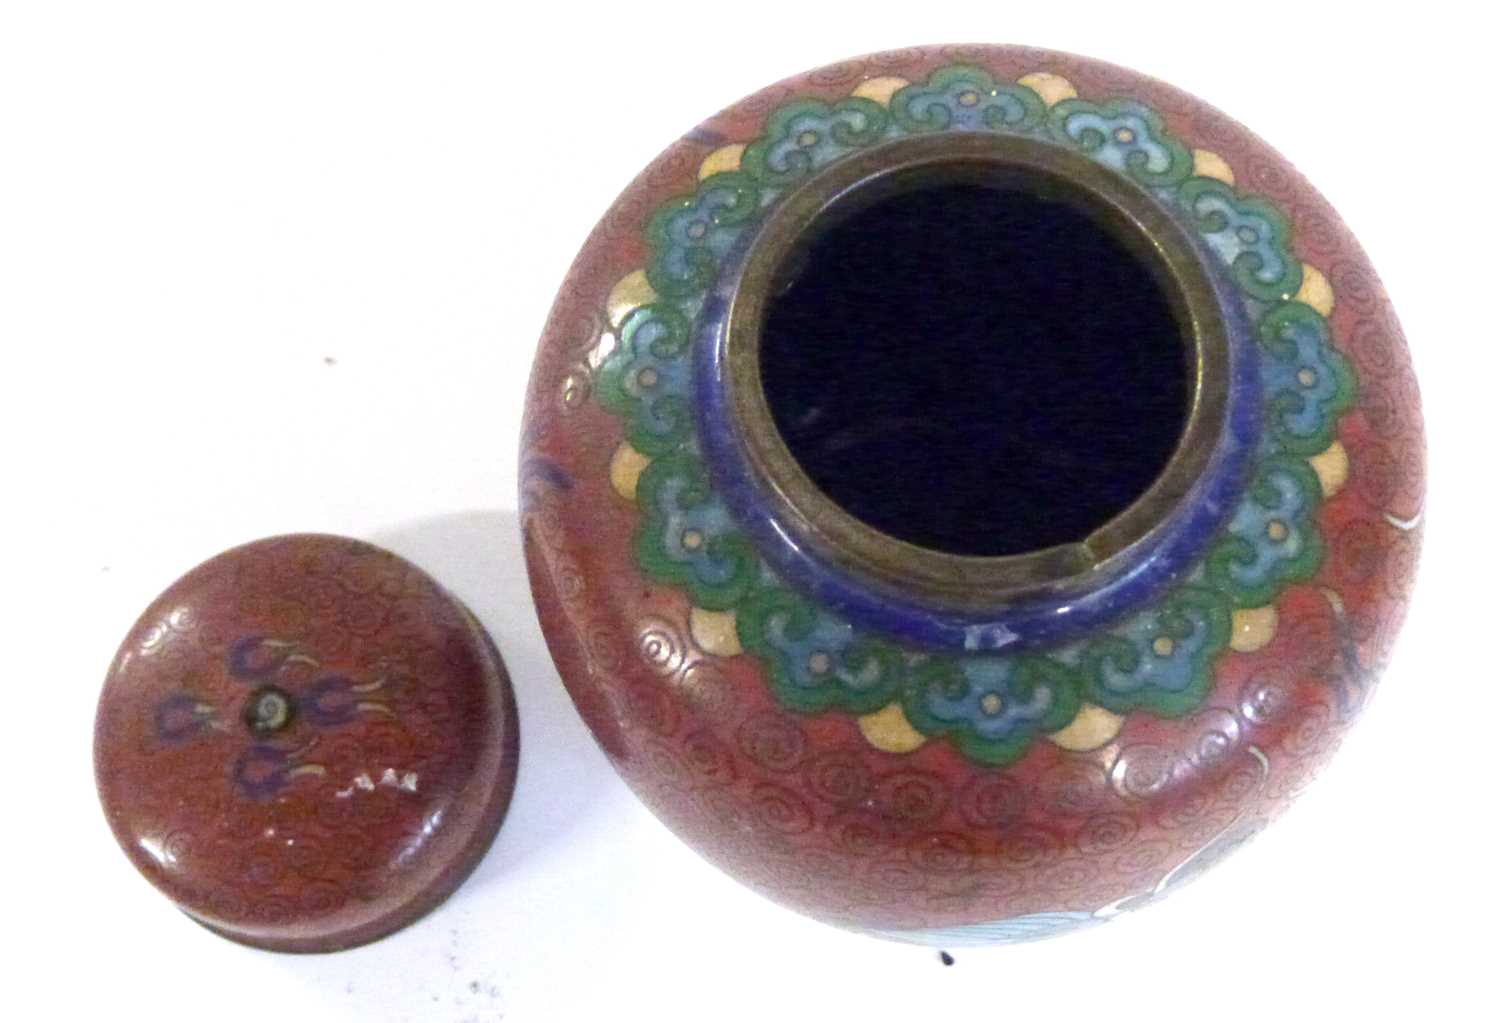 Cloisonne incense burner of globular form with pierced cover together with a small Cloisonne jar and - Image 28 of 36